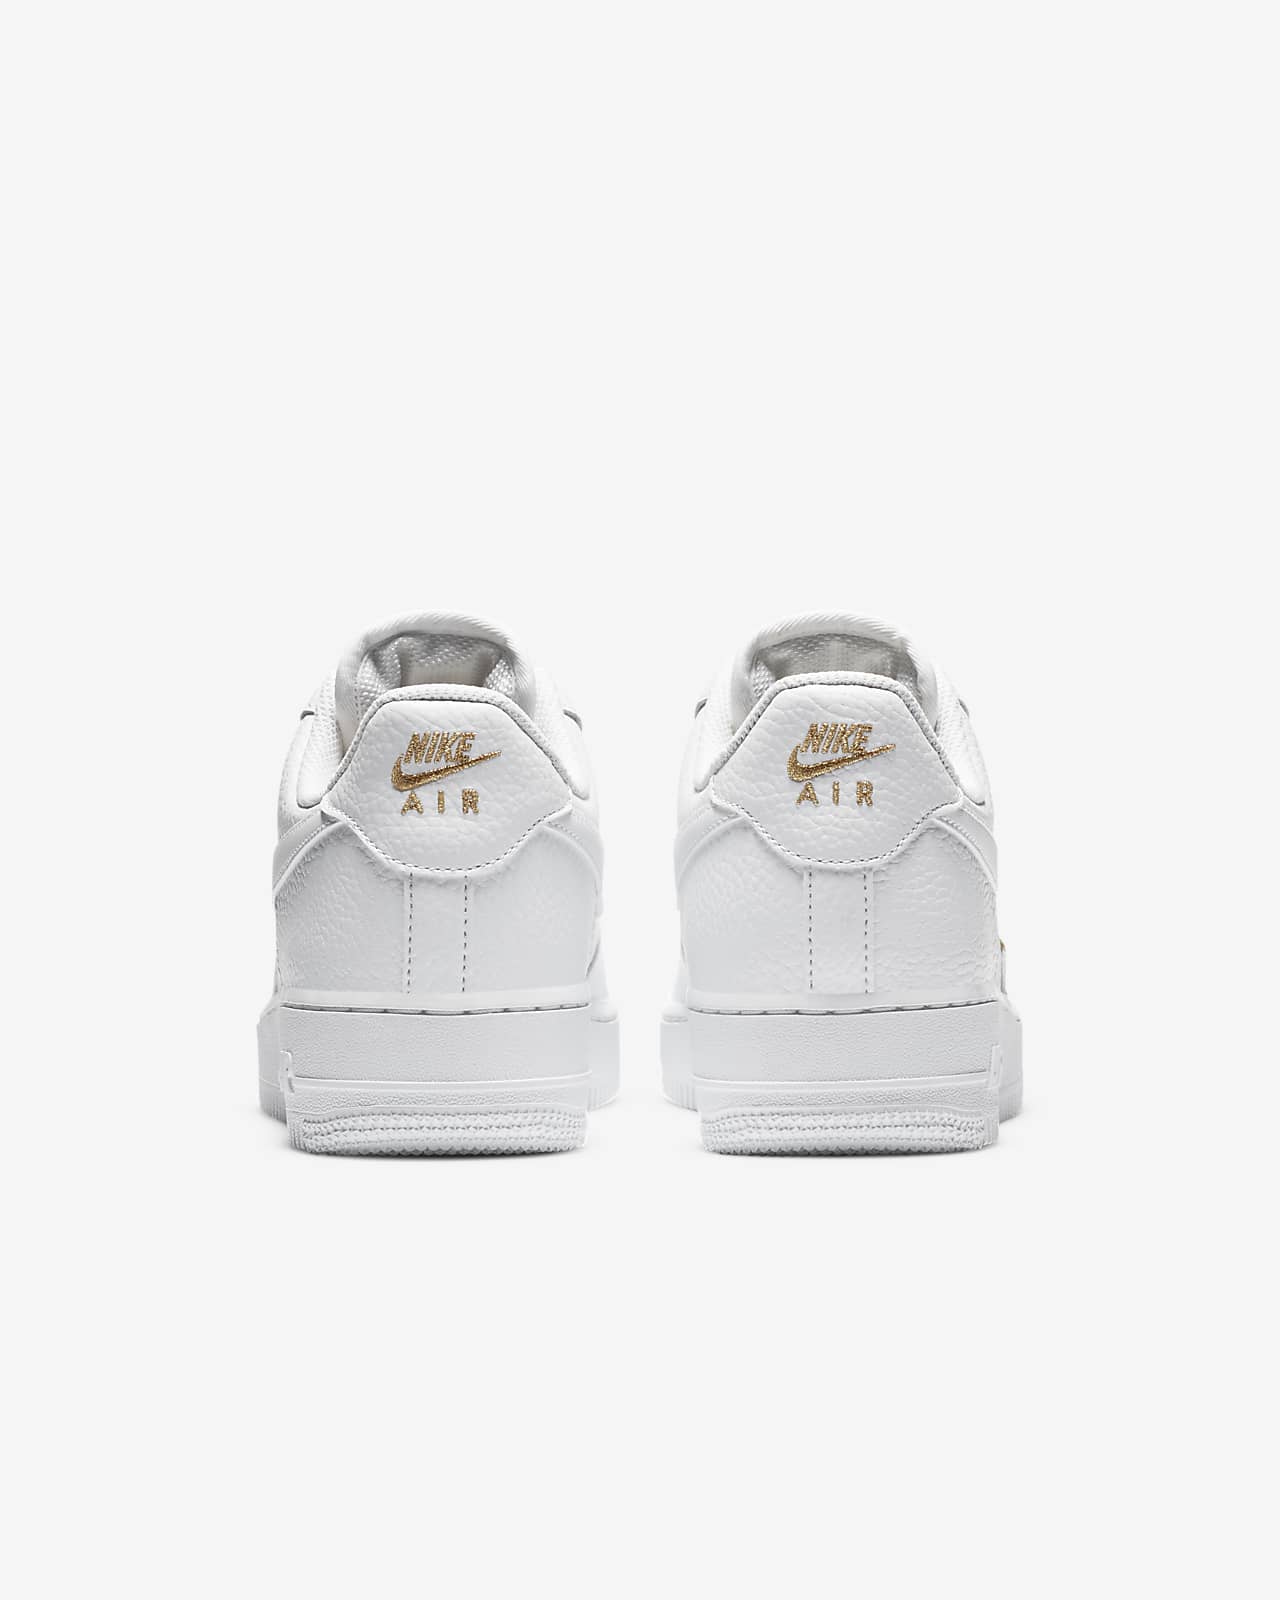 nike air force 1 womens gold and white